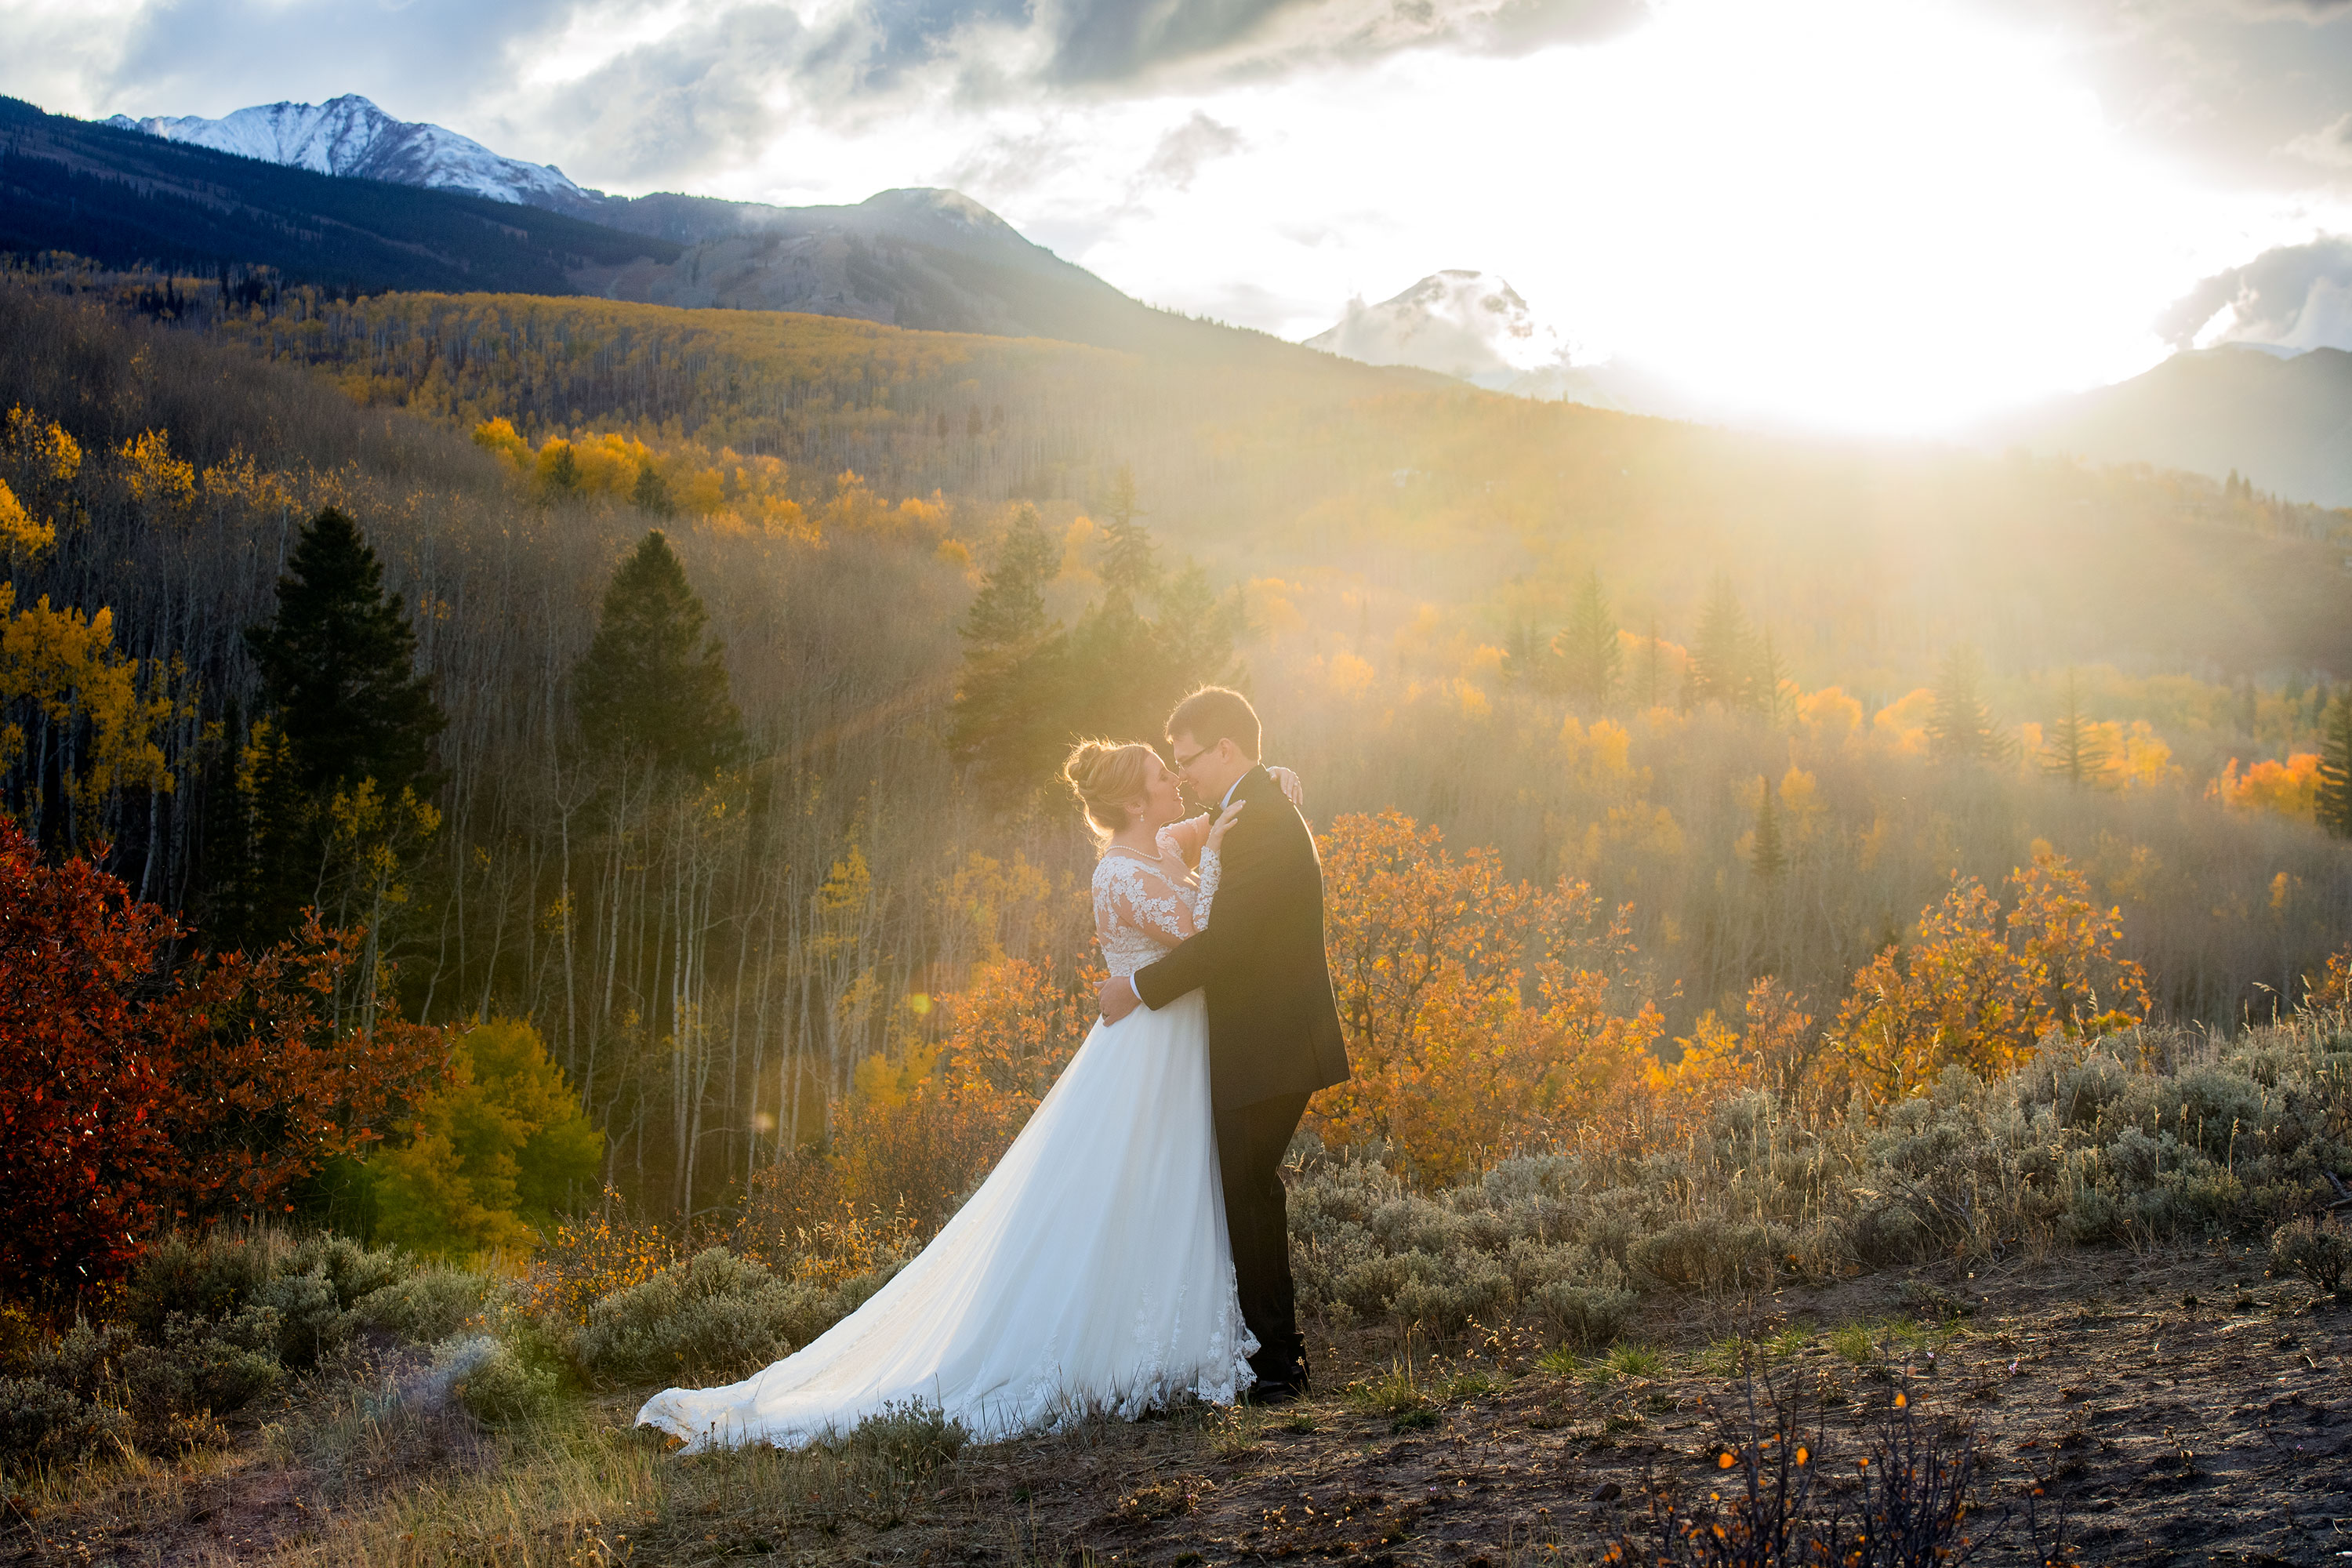 Snowmass Village wedding at the Viceroy Hotel